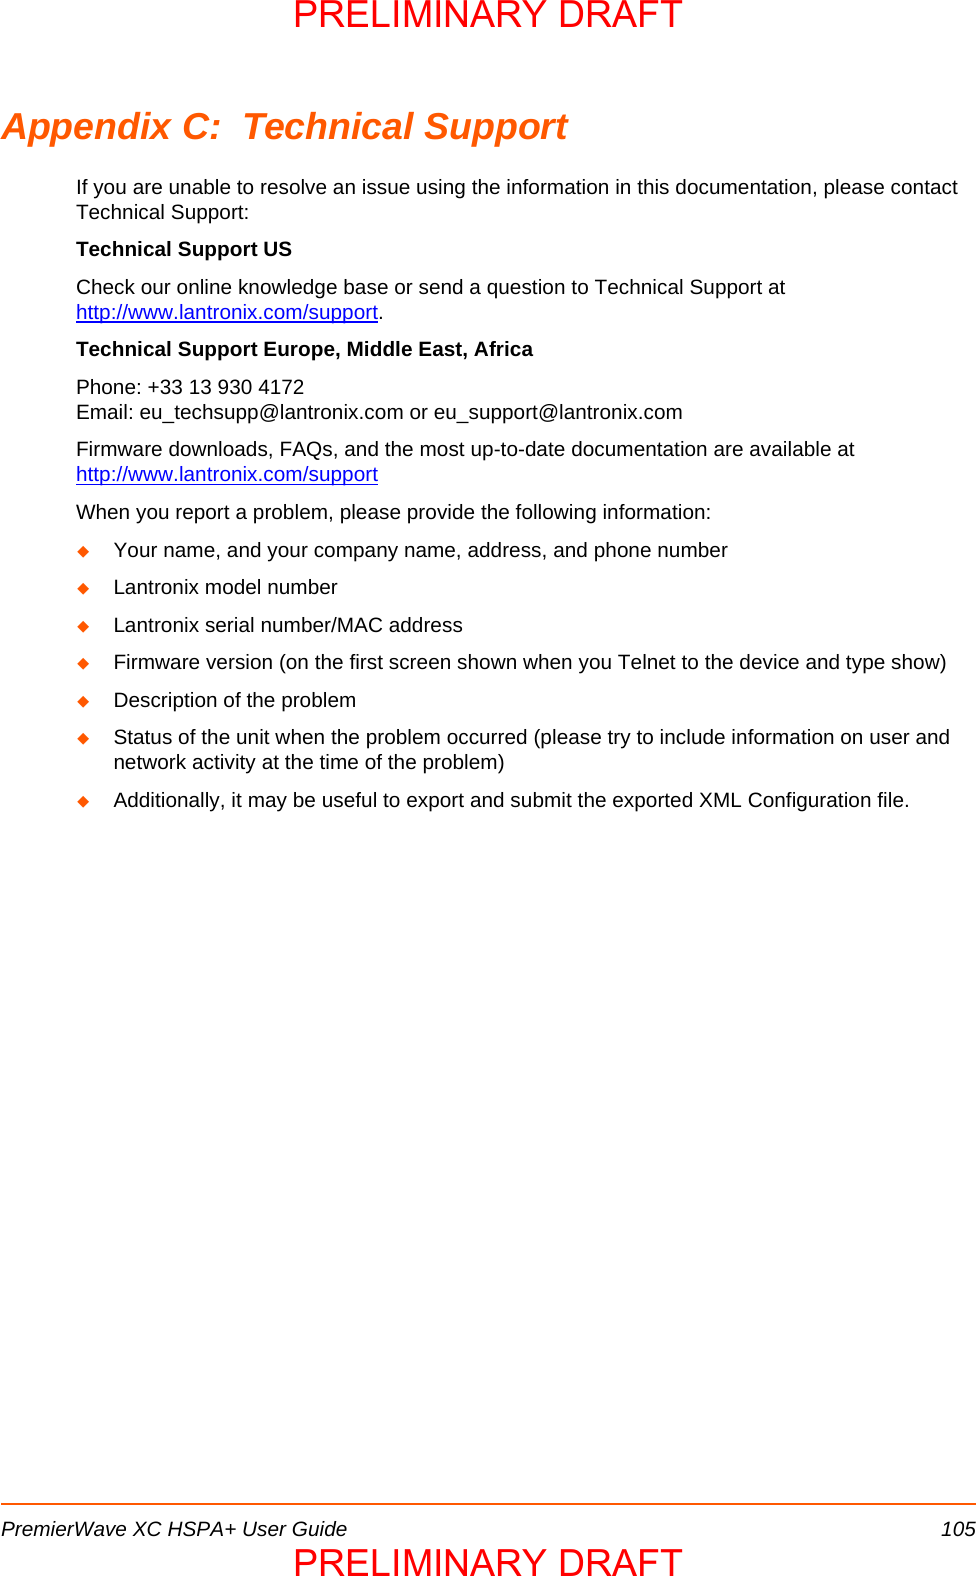 PremierWave XC HSPA+ User Guide 105Appendix C:  Technical SupportIf you are unable to resolve an issue using the information in this documentation, please contact Technical Support:Technical Support USCheck our online knowledge base or send a question to Technical Support at http://www.lantronix.com/support.Technical Support Europe, Middle East, AfricaPhone: +33 13 930 4172        Email: eu_techsupp@lantronix.com or eu_support@lantronix.comFirmware downloads, FAQs, and the most up-to-date documentation are available at http://www.lantronix.com/supportWhen you report a problem, please provide the following information: Your name, and your company name, address, and phone numberLantronix model numberLantronix serial number/MAC addressFirmware version (on the first screen shown when you Telnet to the device and type show)Description of the problemStatus of the unit when the problem occurred (please try to include information on user and network activity at the time of the problem) Additionally, it may be useful to export and submit the exported XML Configuration file.PRELIMINARY DRAFTPRELIMINARY DRAFT